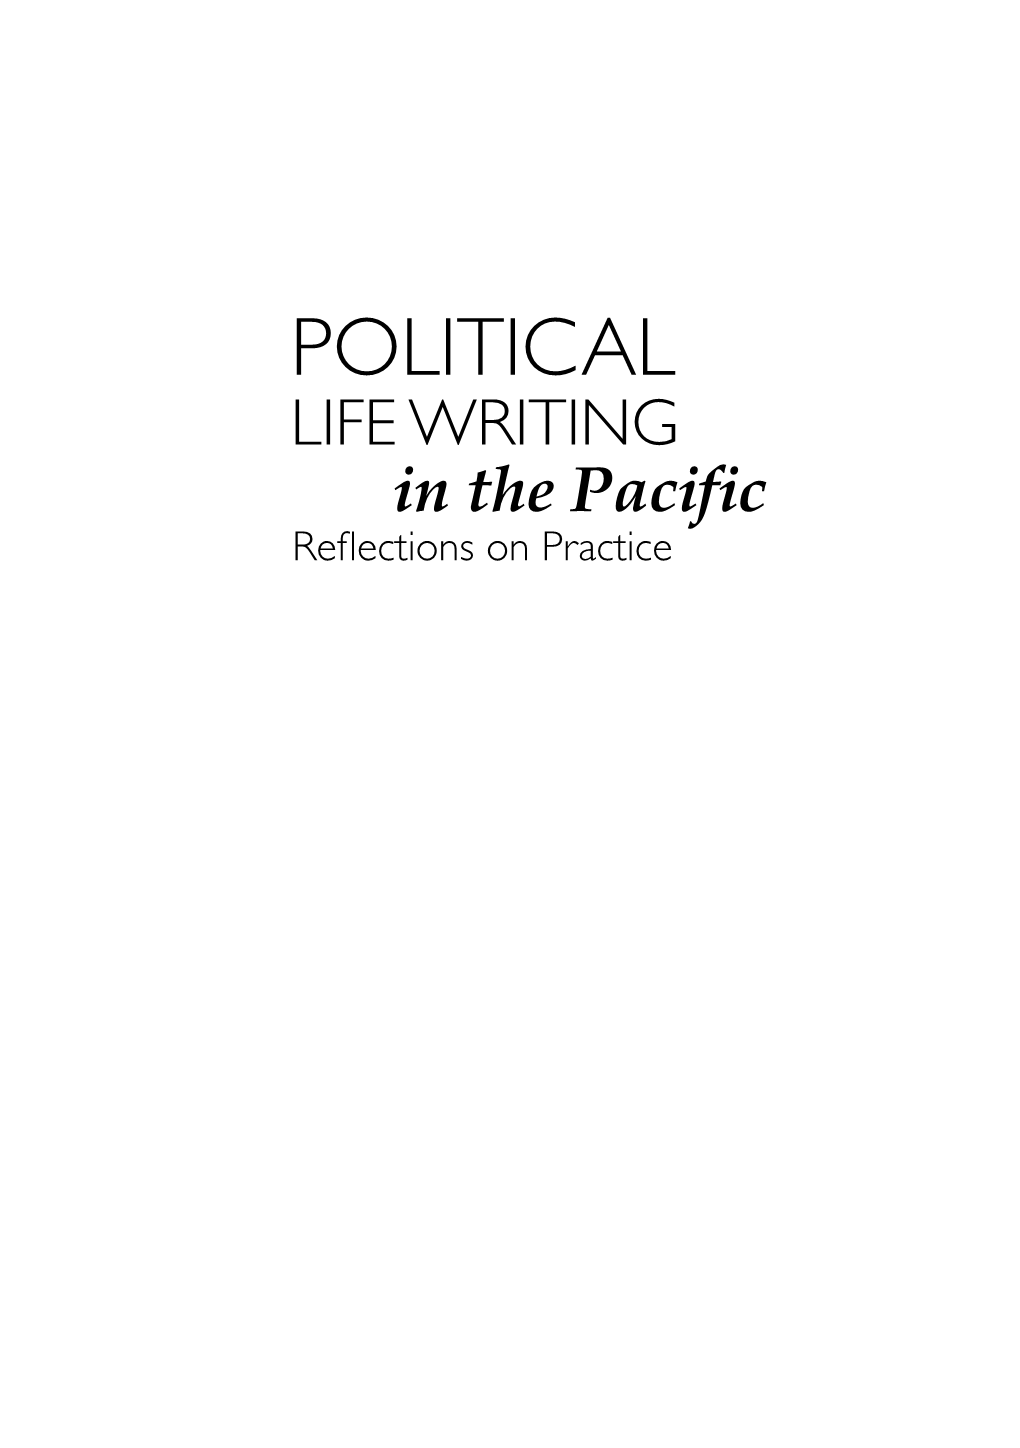 POLITICAL LIFE WRITING in the Pacific Reflections on Practice